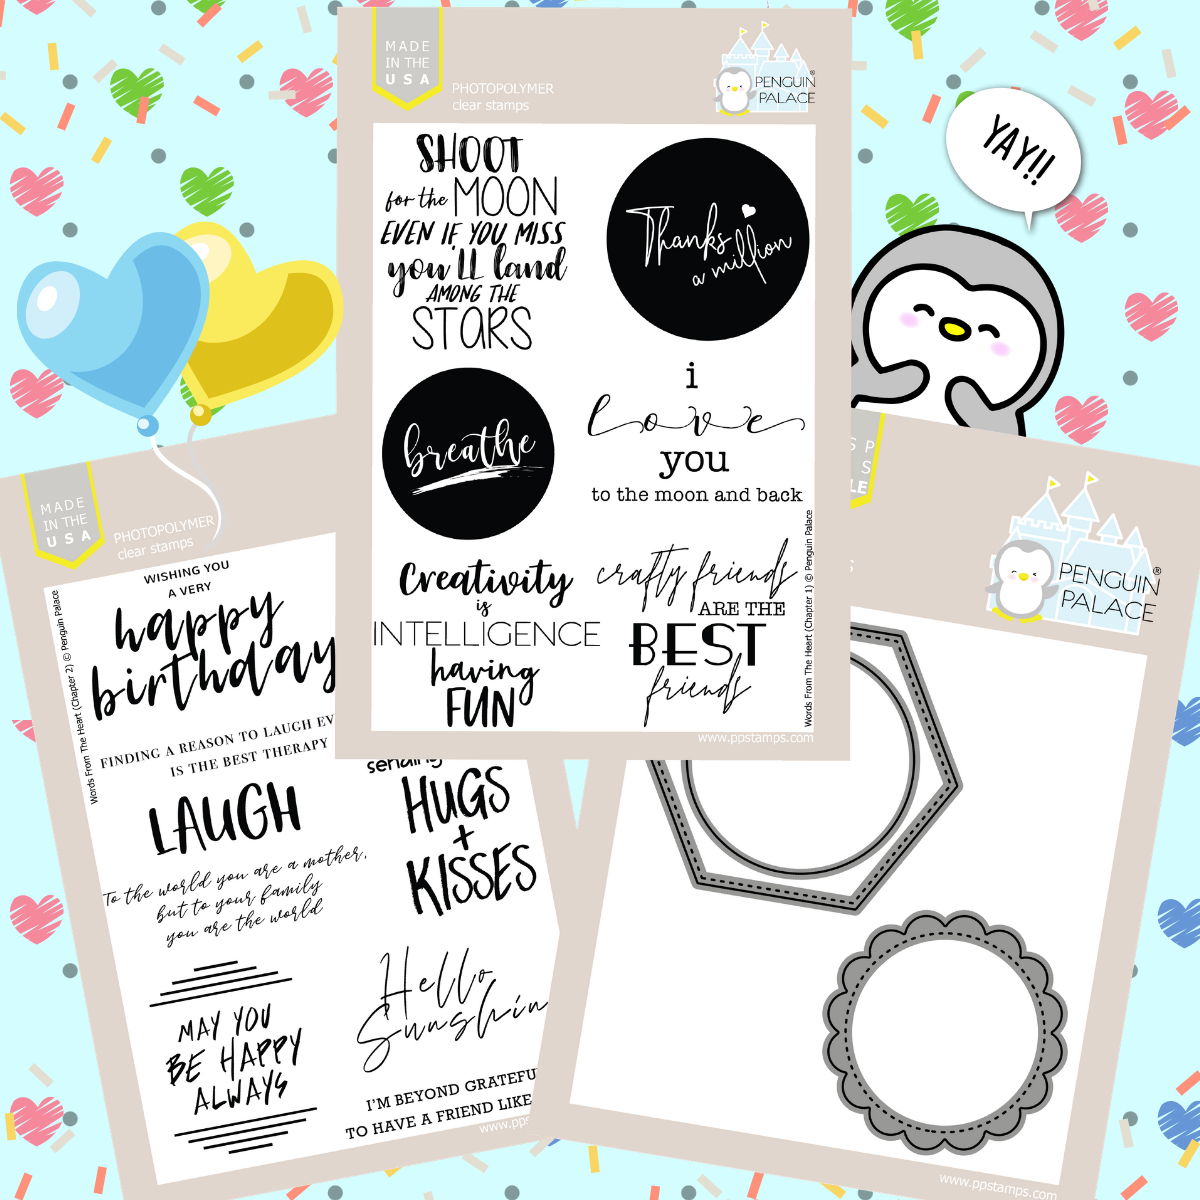 Words From the Heart (Chapters 1 & 2) Stamps and Dies Bundle